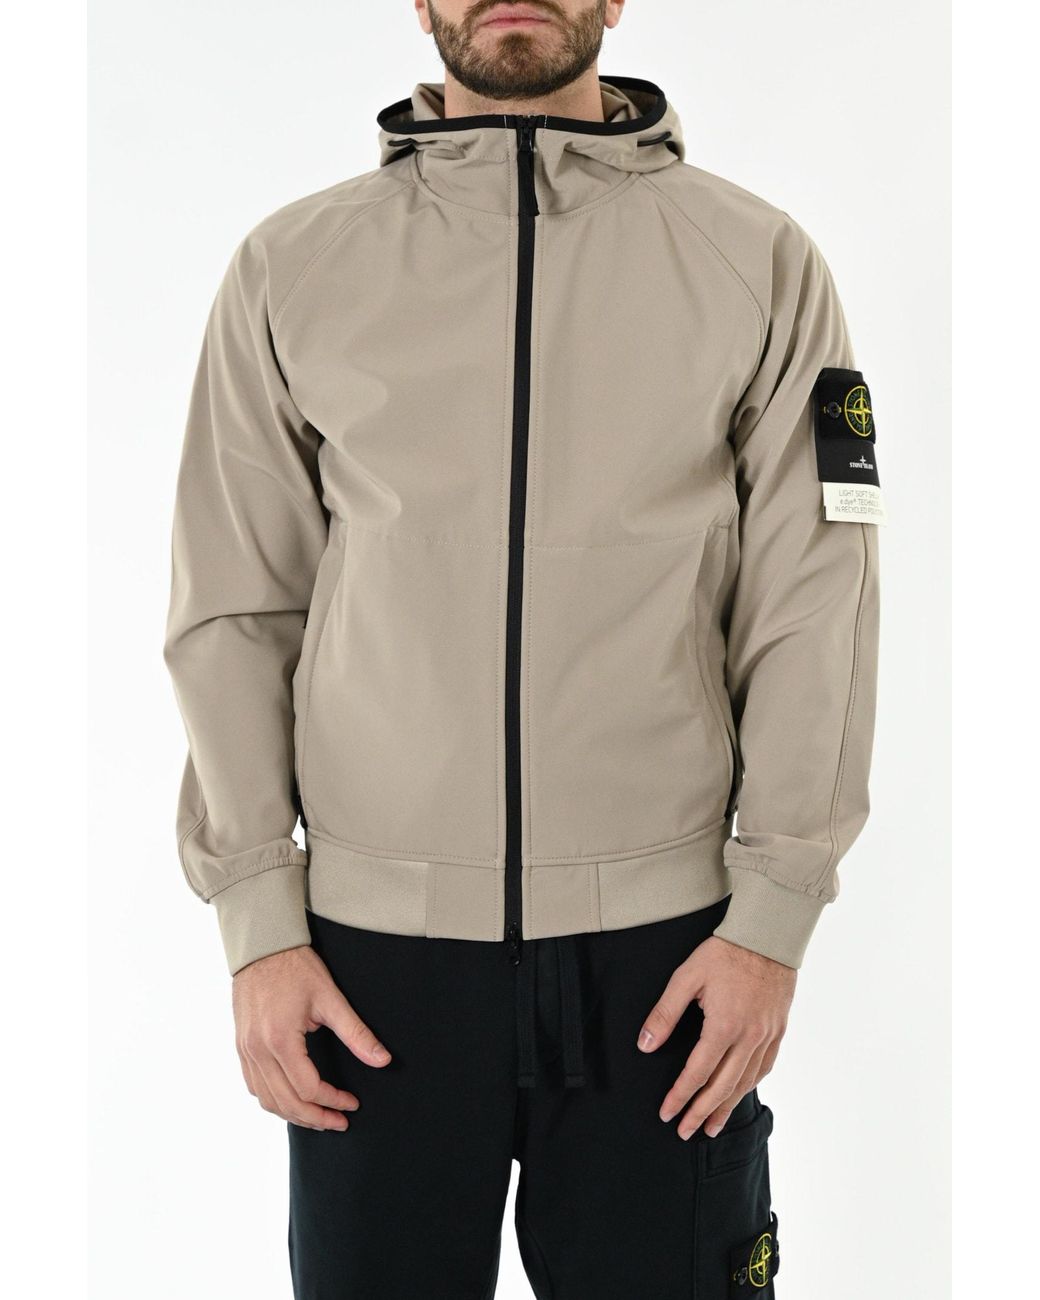 Stone Island Jacket With Hood in Natural for Men | Lyst